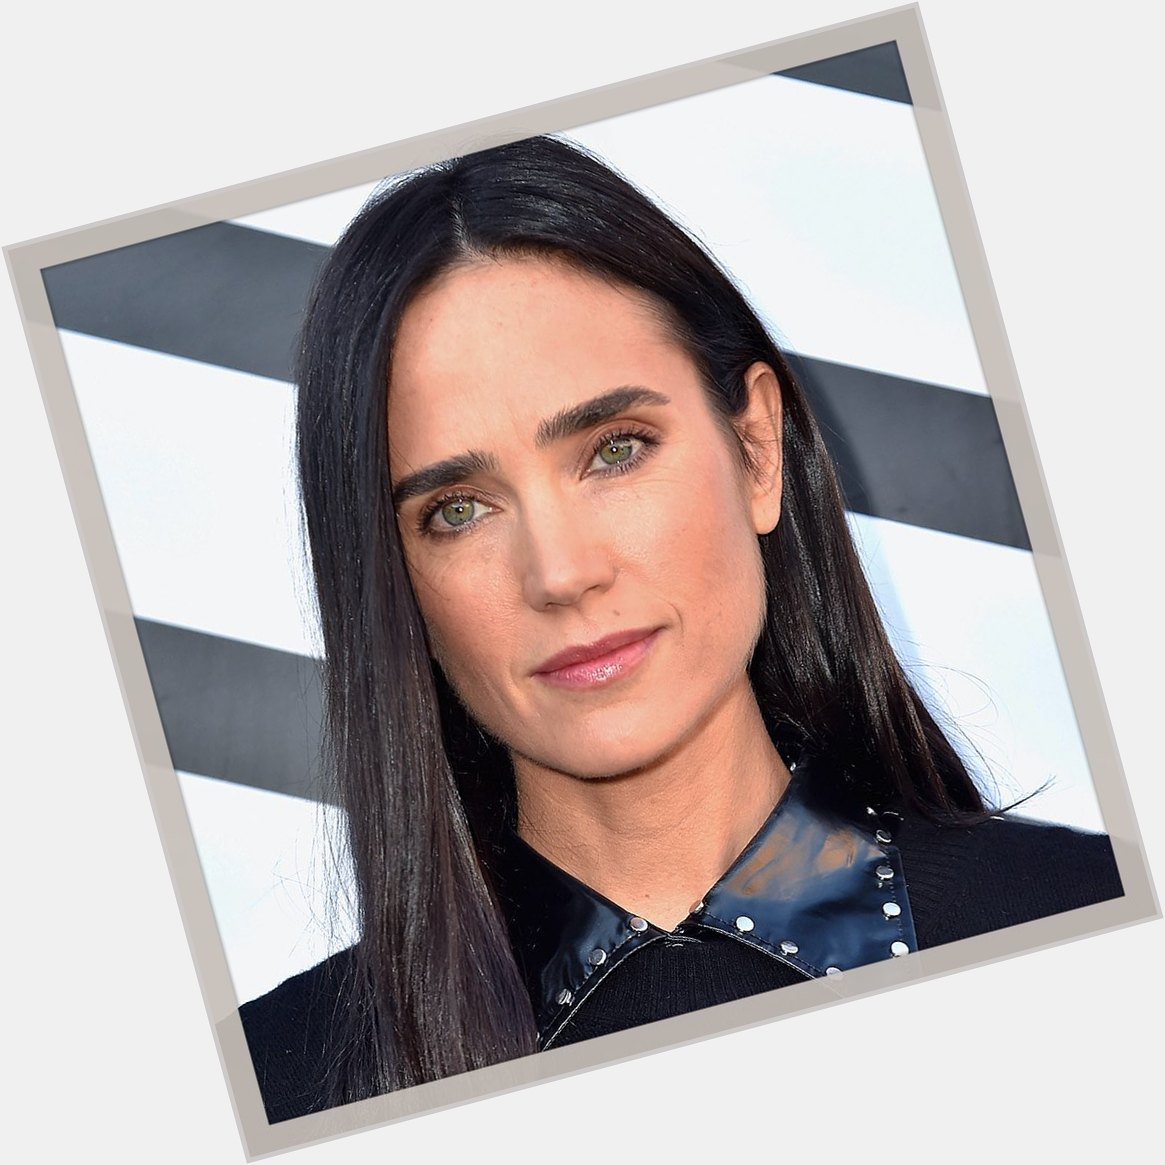 Happy birthday to Jennifer Connelly. 50 is a big one. Hope she has a great day 